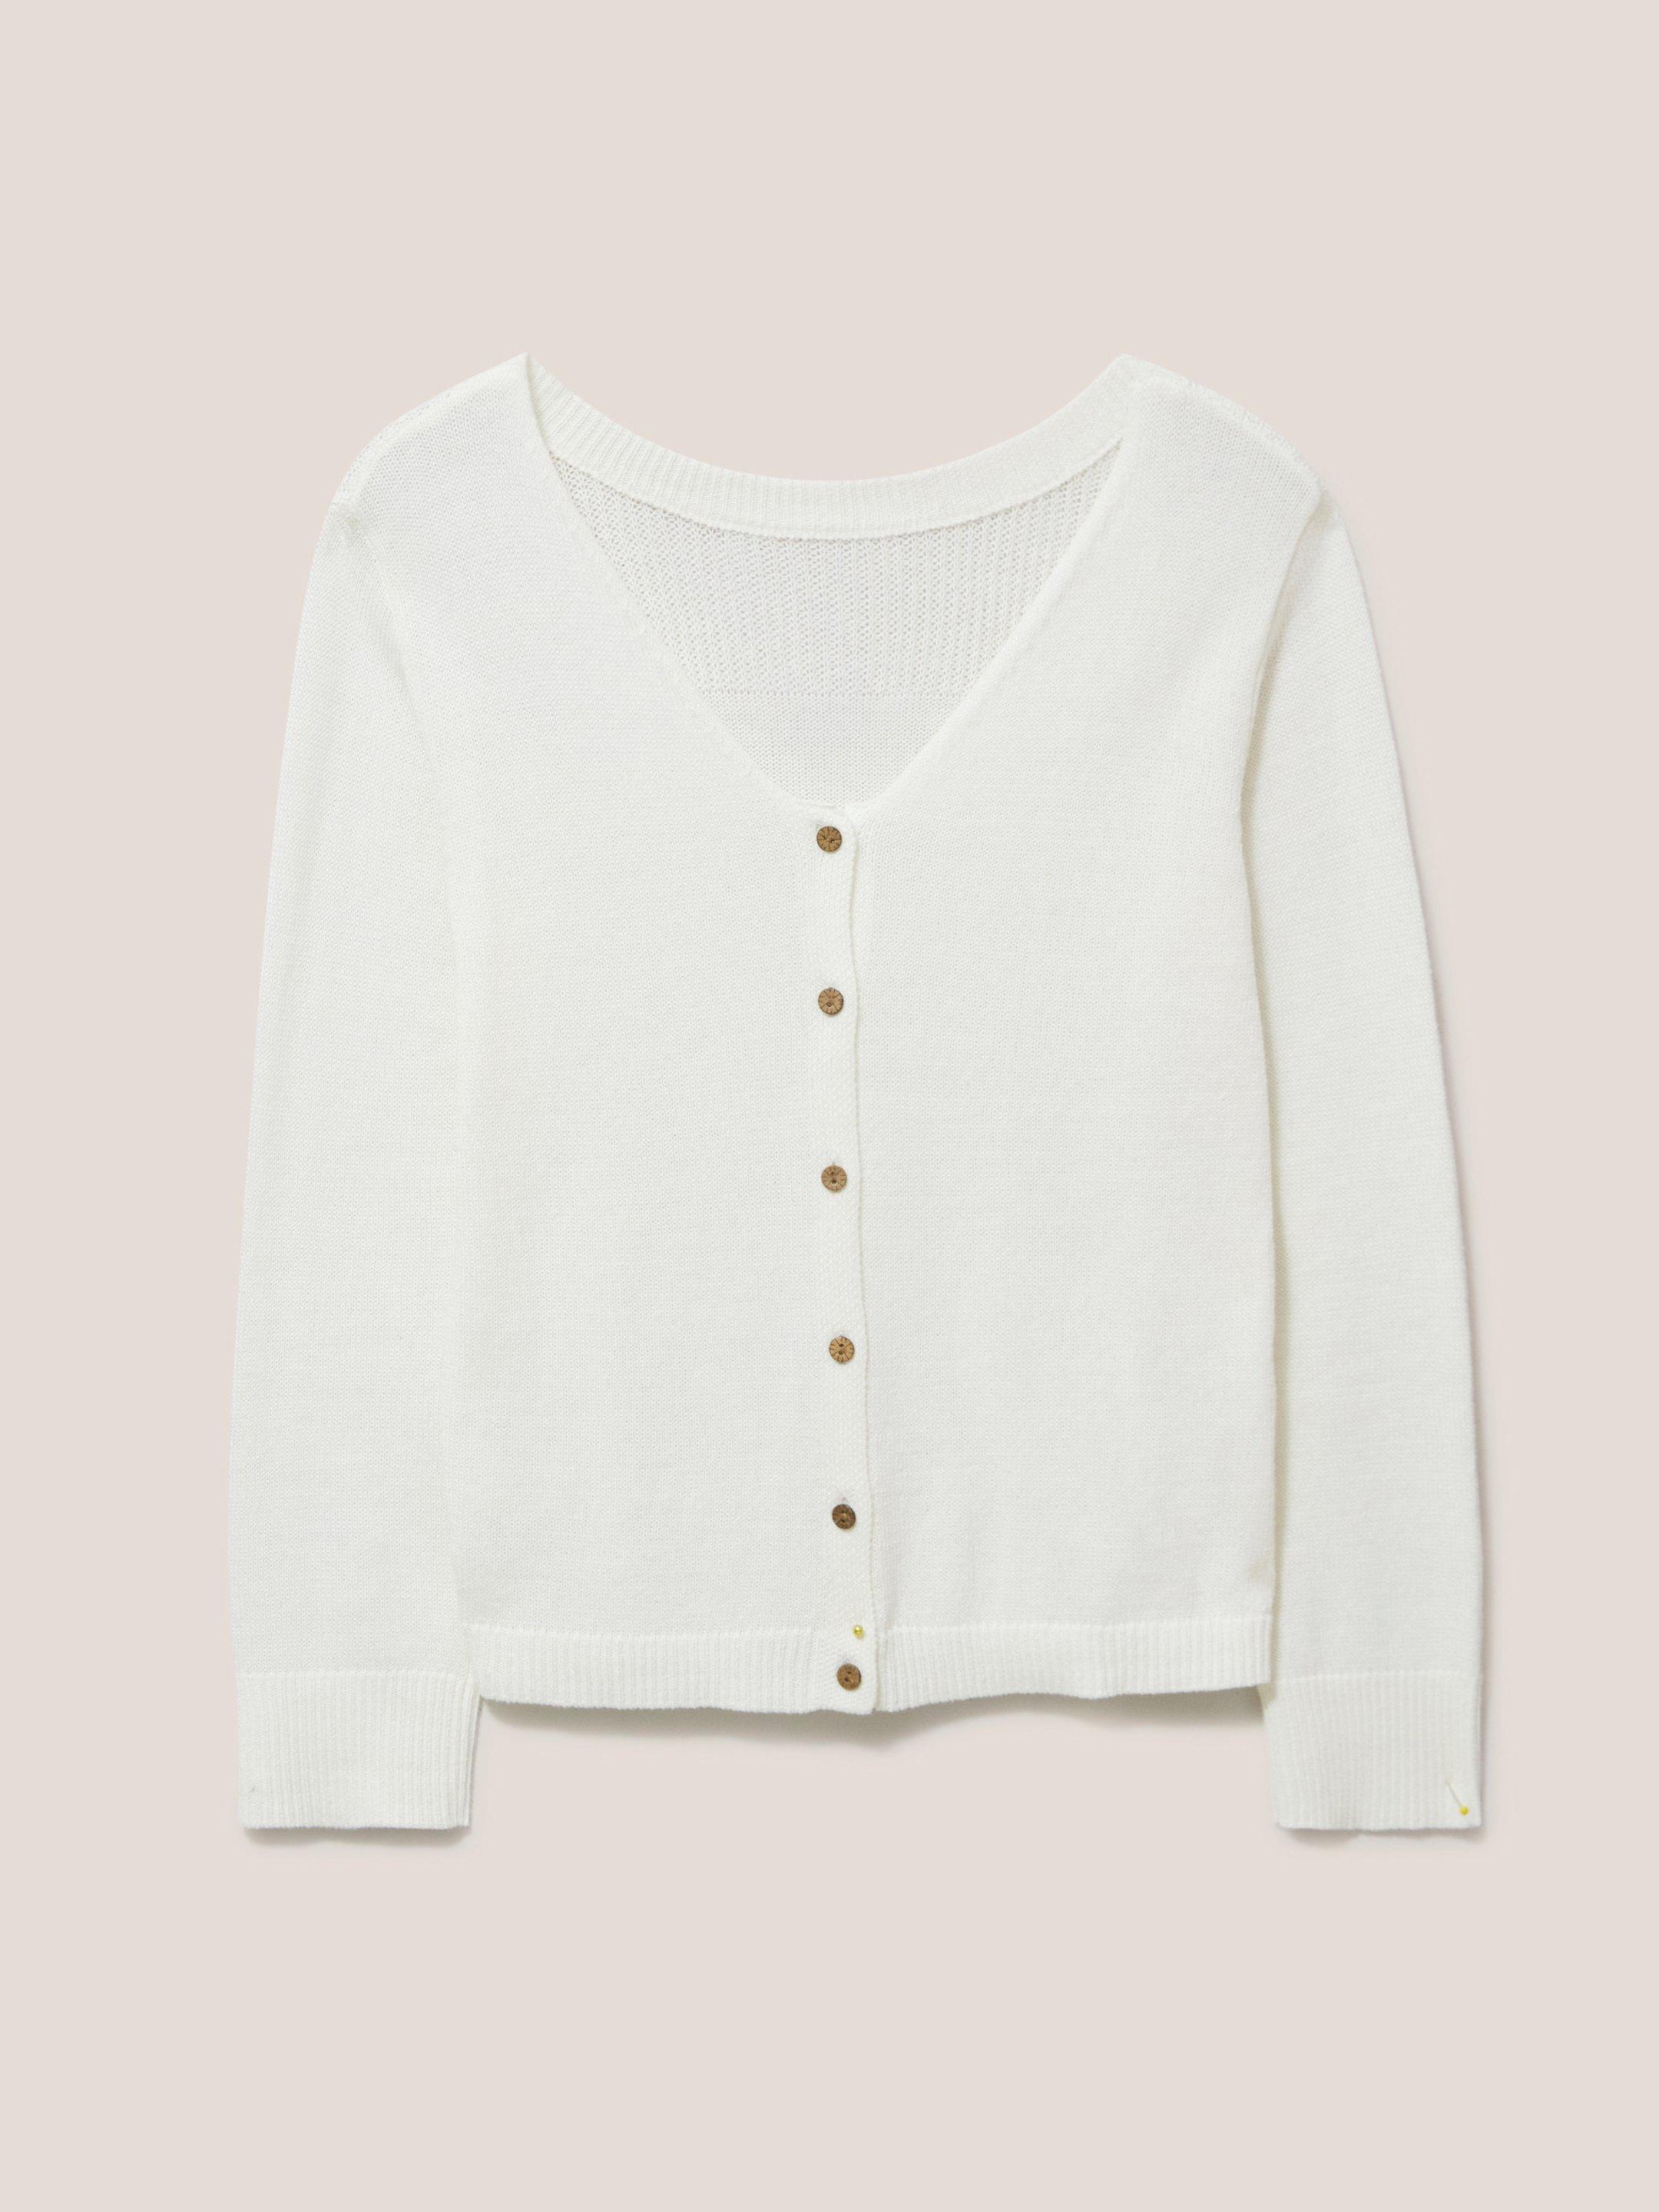 HANNAH JUMPER in NAT WHITE - FLAT FRONT